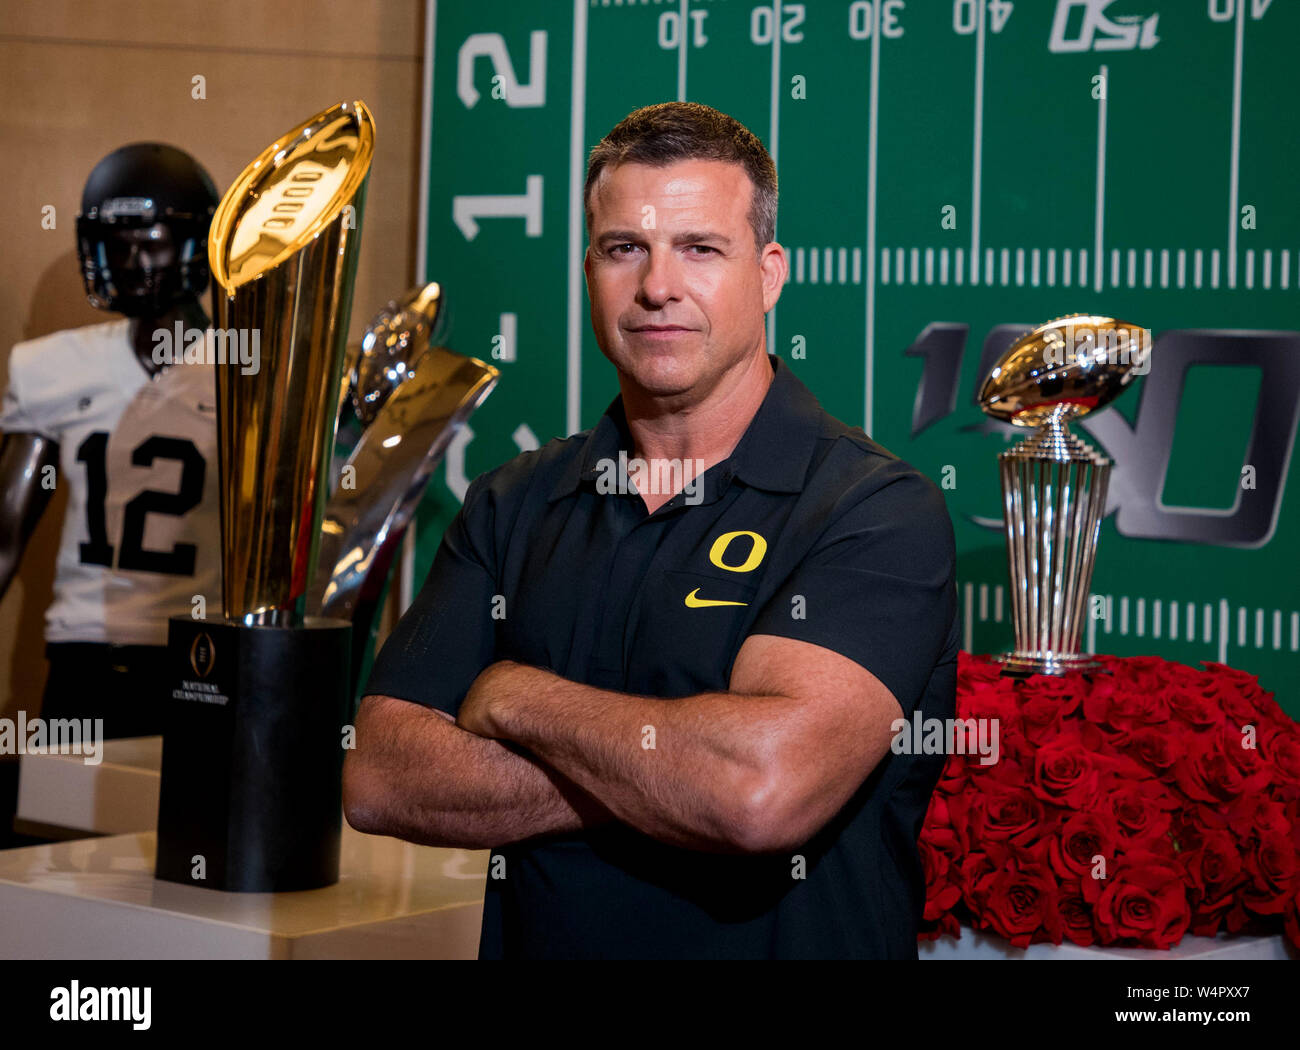 hollywood-ca-24th-july-2019-oregon-ducks-head-coach-mario-cristobal-poses-for-a-photo-in-front-of-the-rose-bowl-and-national-championship-trophies-at-the-pac-12-football-media-day-on-wednesday-july-24-2019-at-the-hollywood-and-highland-in-hollywood-ca-mandatory-credit-juan-lainezmarinmediaorgcal-sport-media-complete-photographer-and-credit-required-credit-csmalamy-live-news-W4PXX7.jpg